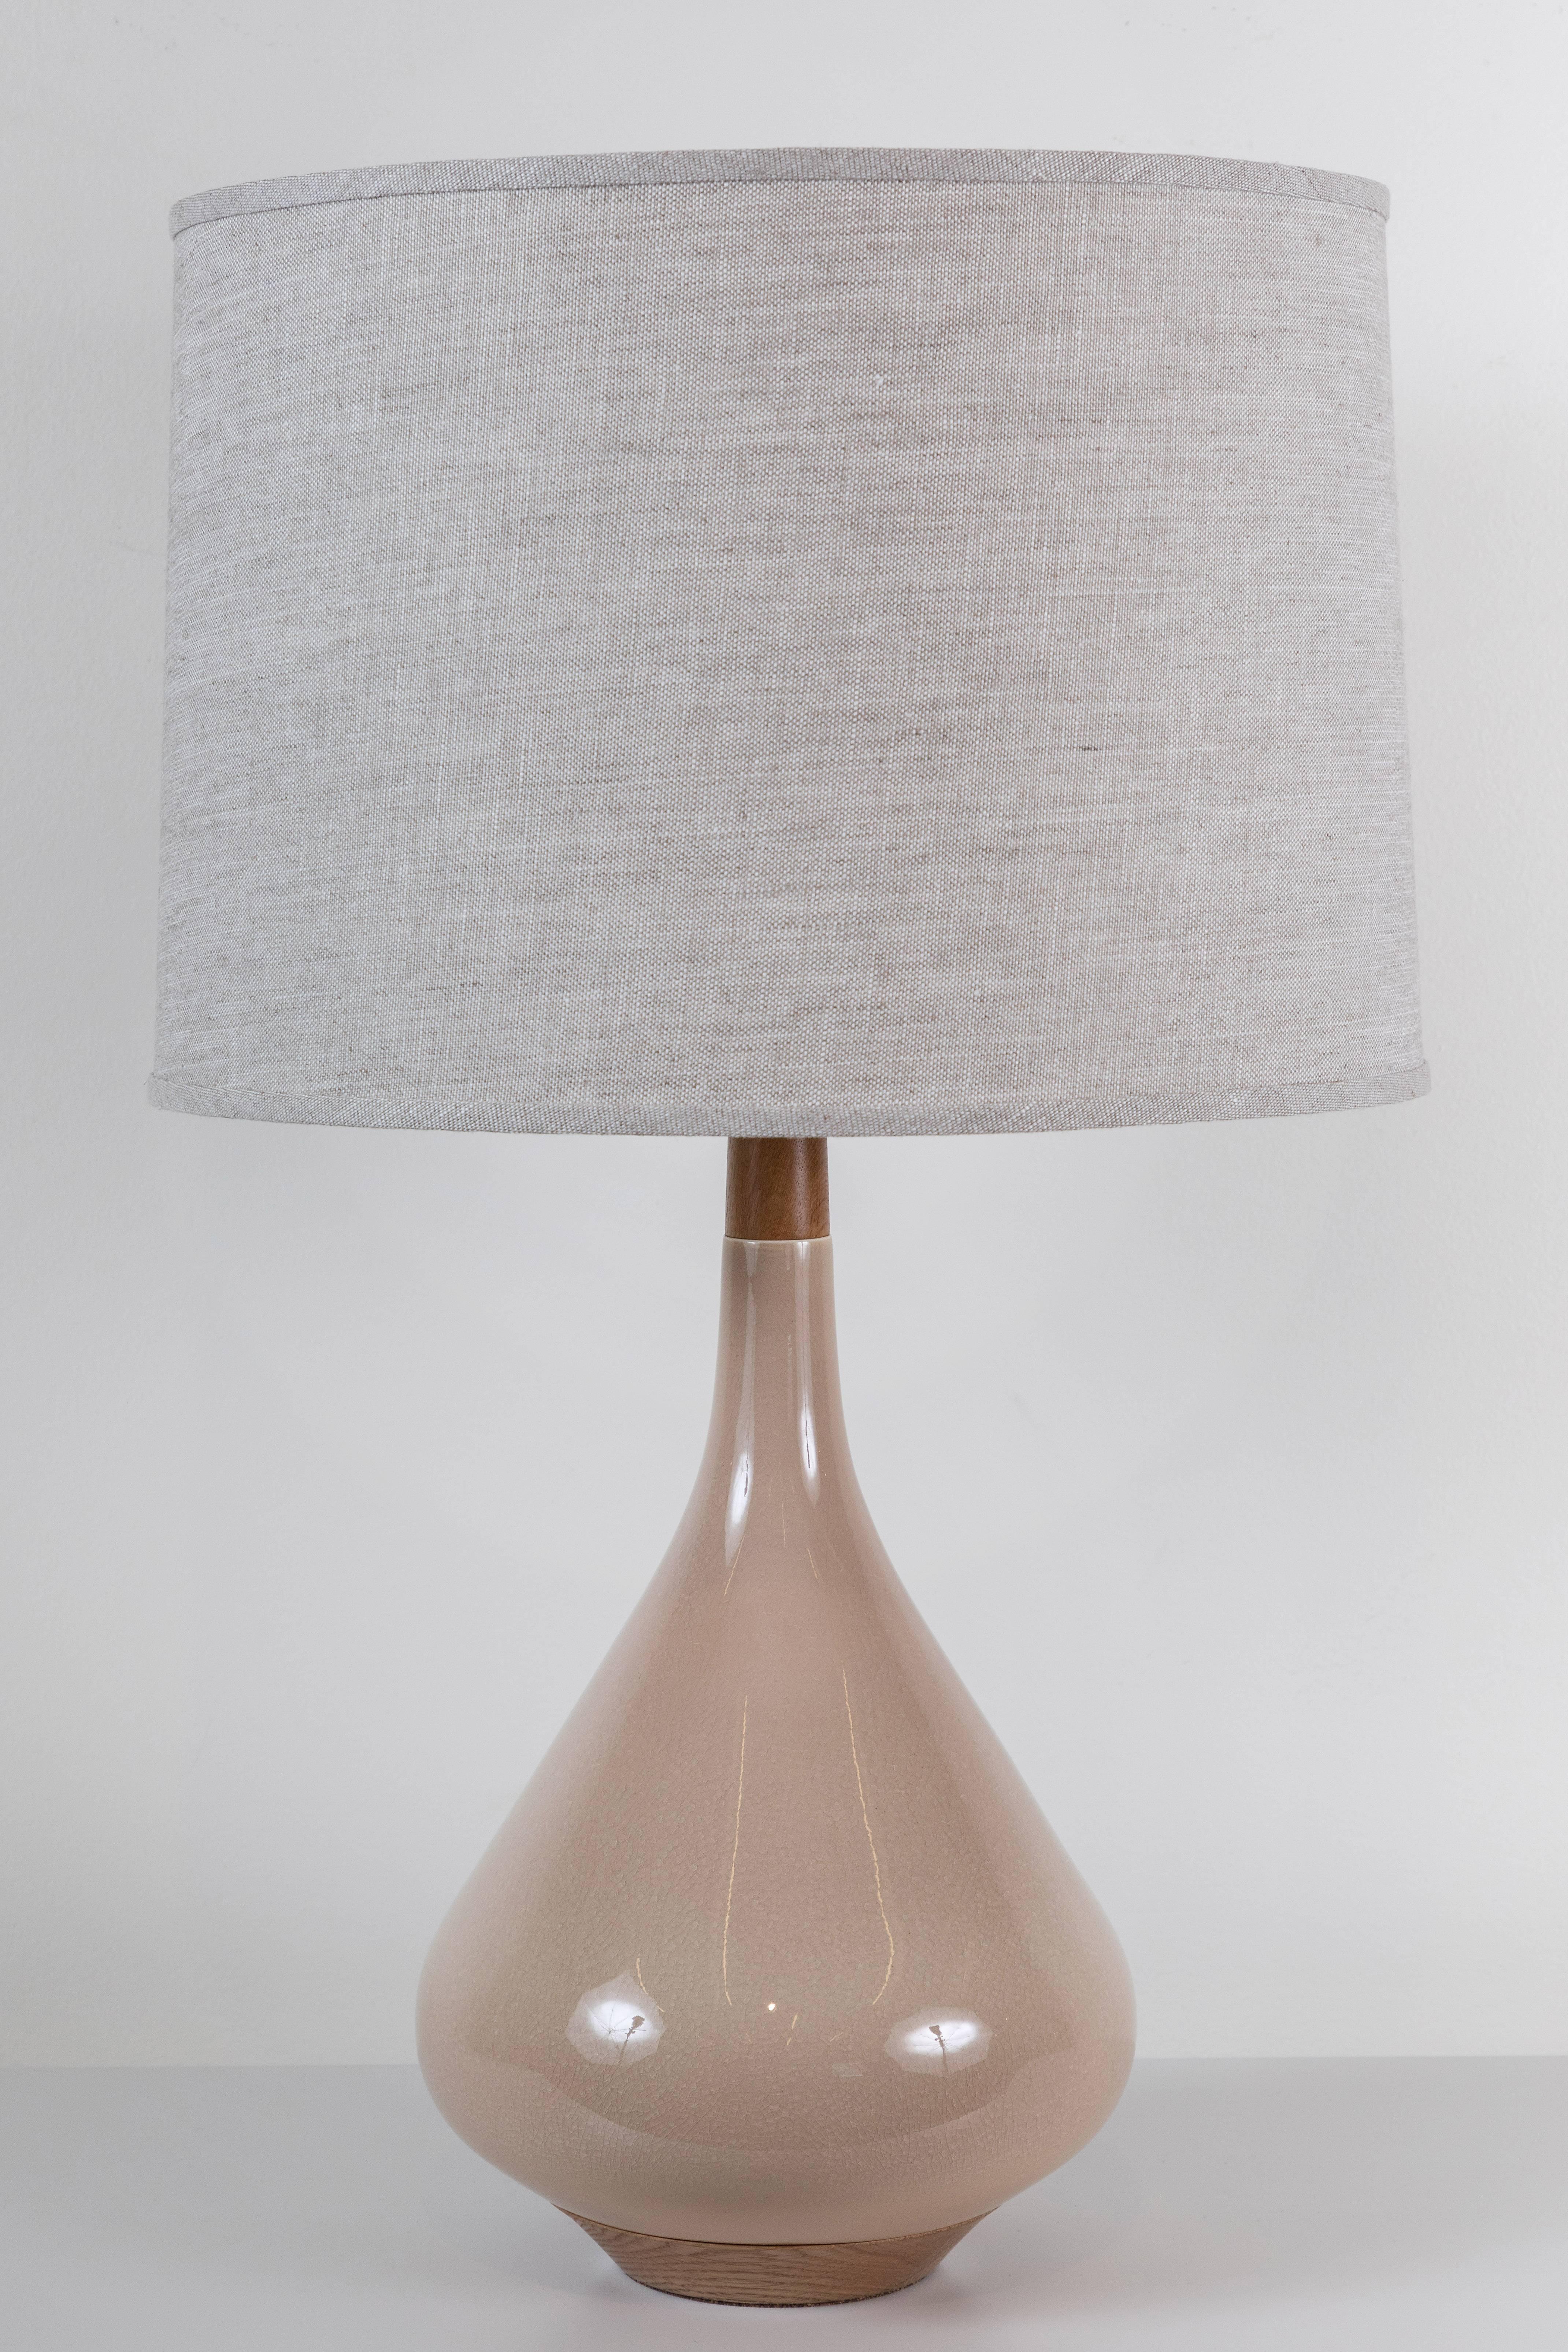 Mid-Century Modern Pair of Miller Lamps by Stone and Sawyer for Lawson-Fenning